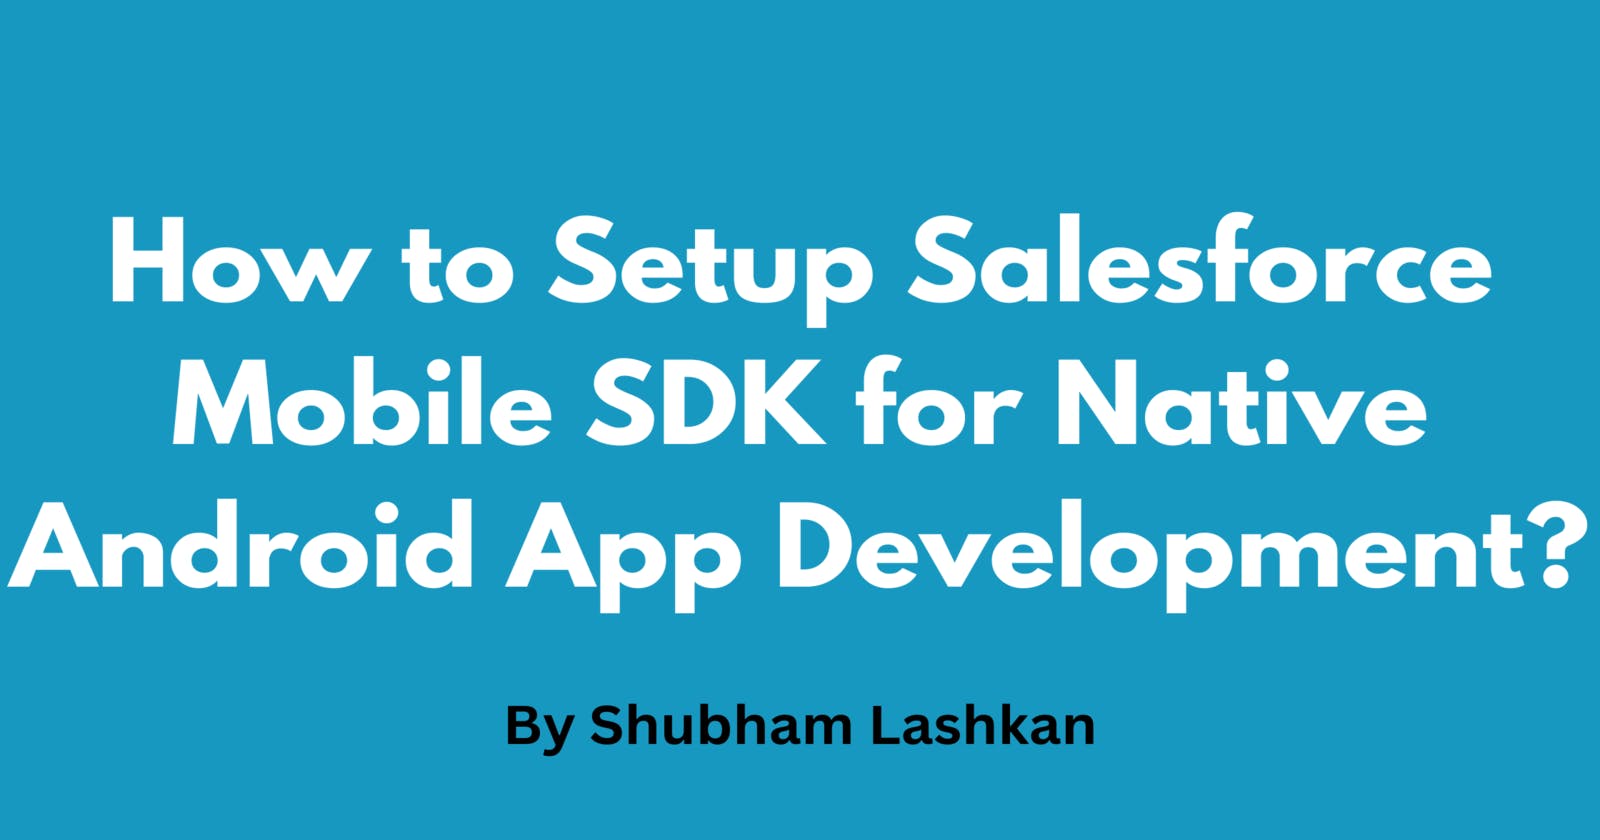 How to Setup Salesforce Mobile SDK for Native Android App Development?